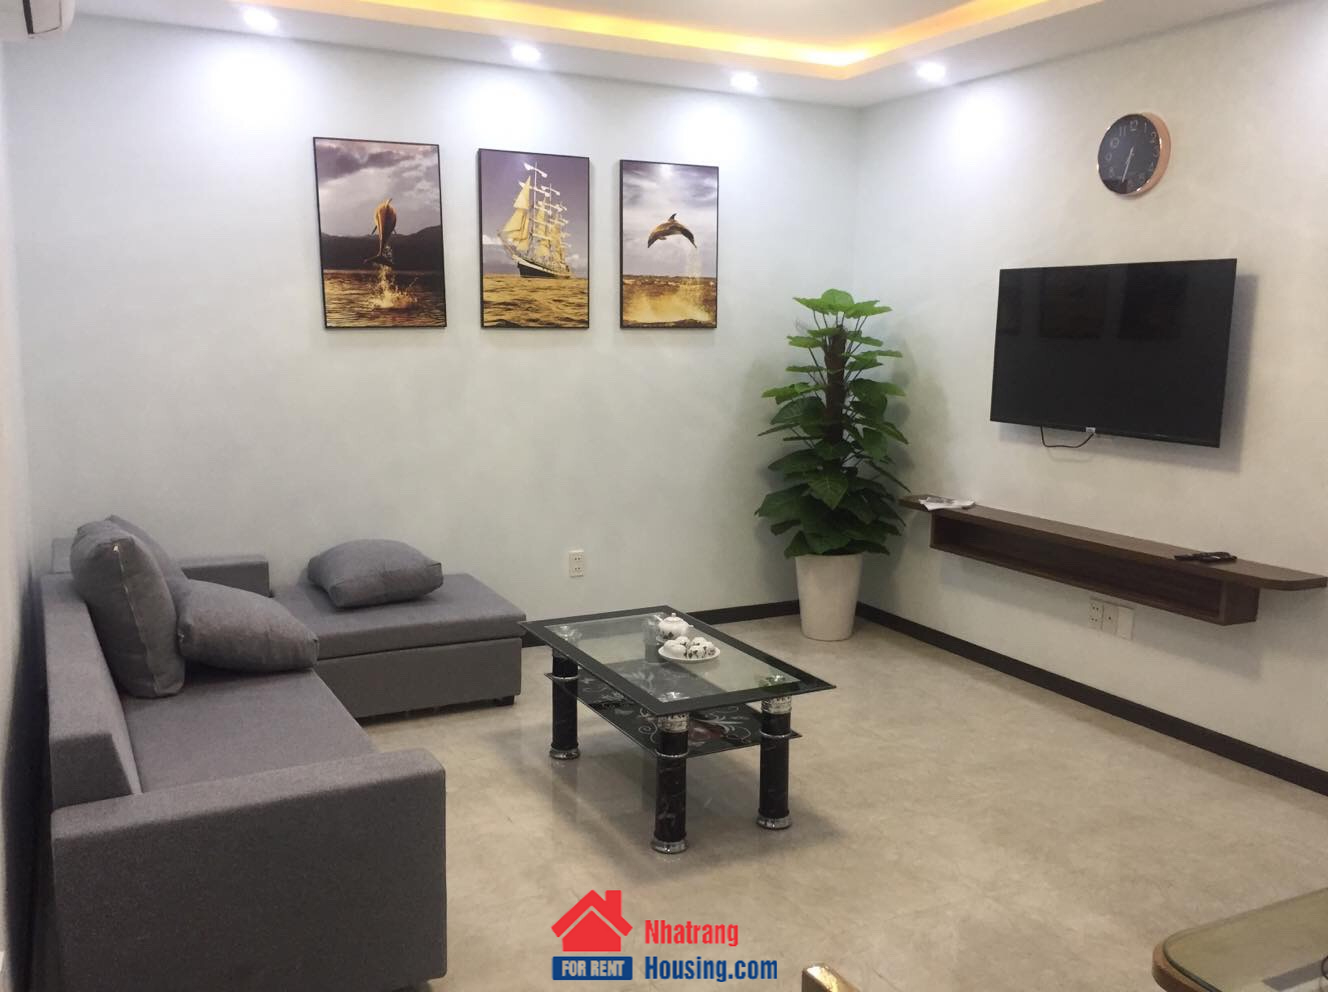 Muong Thanh Khanh Hoa 04 for rent | 2 bedrooms Apartment | 6 million